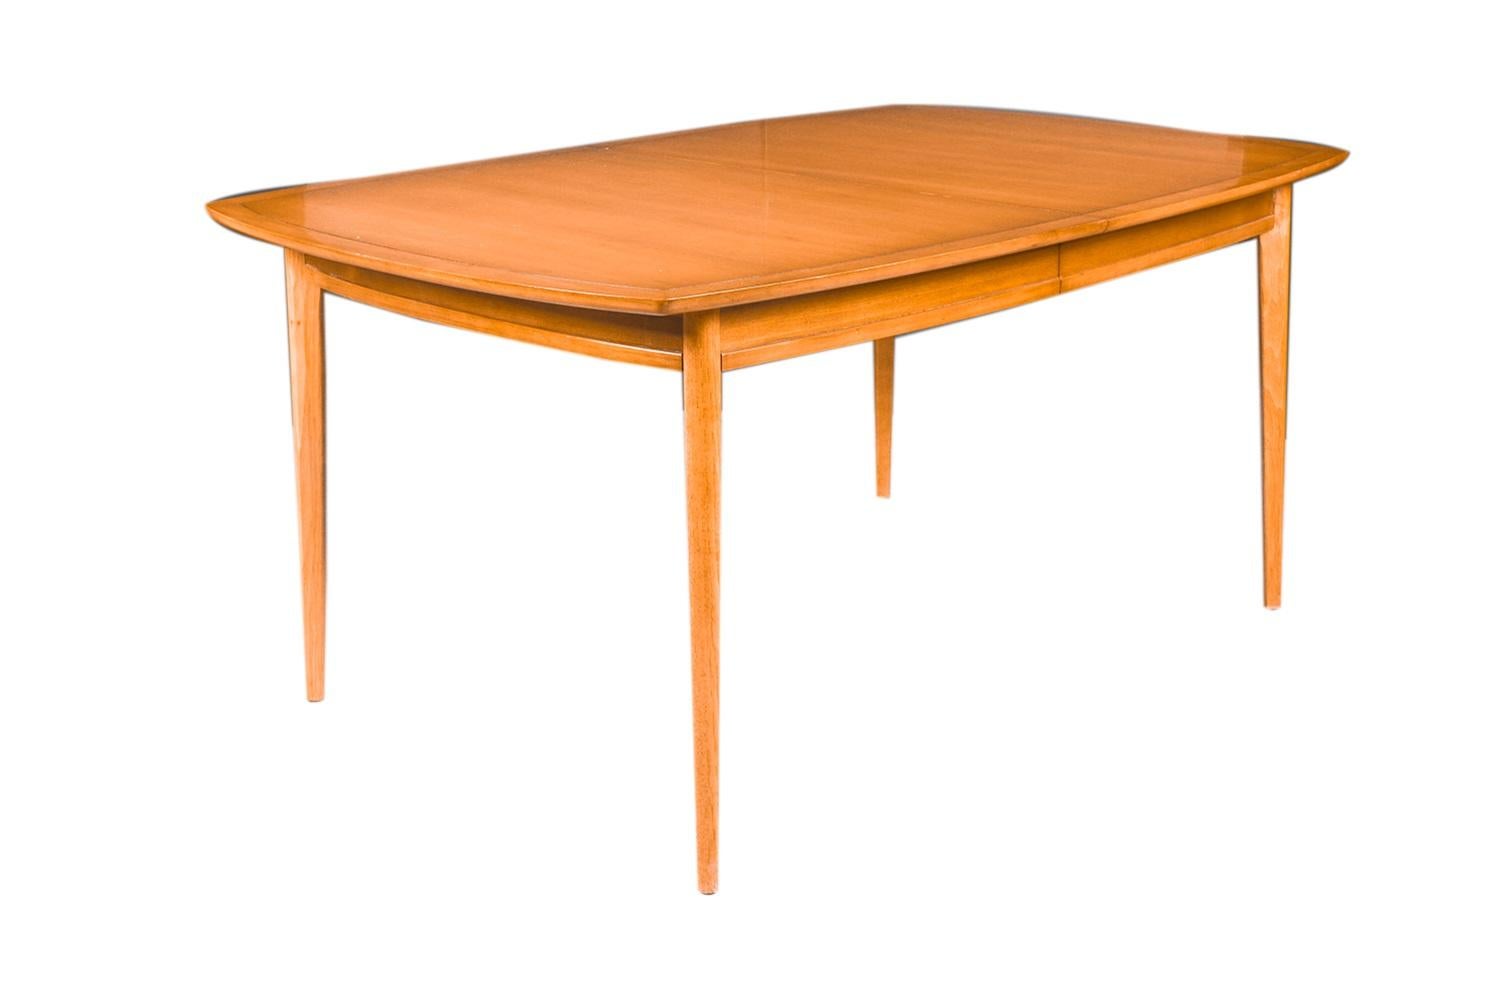 Beautiful Mid-Century Modern expandable Drexel Heritage Meridian dining table designed by James Bouffard for Drexel's Meridian collection circa 1960's. Features richly grained, butternut wood, clean lines characteristic of classic Danish design.